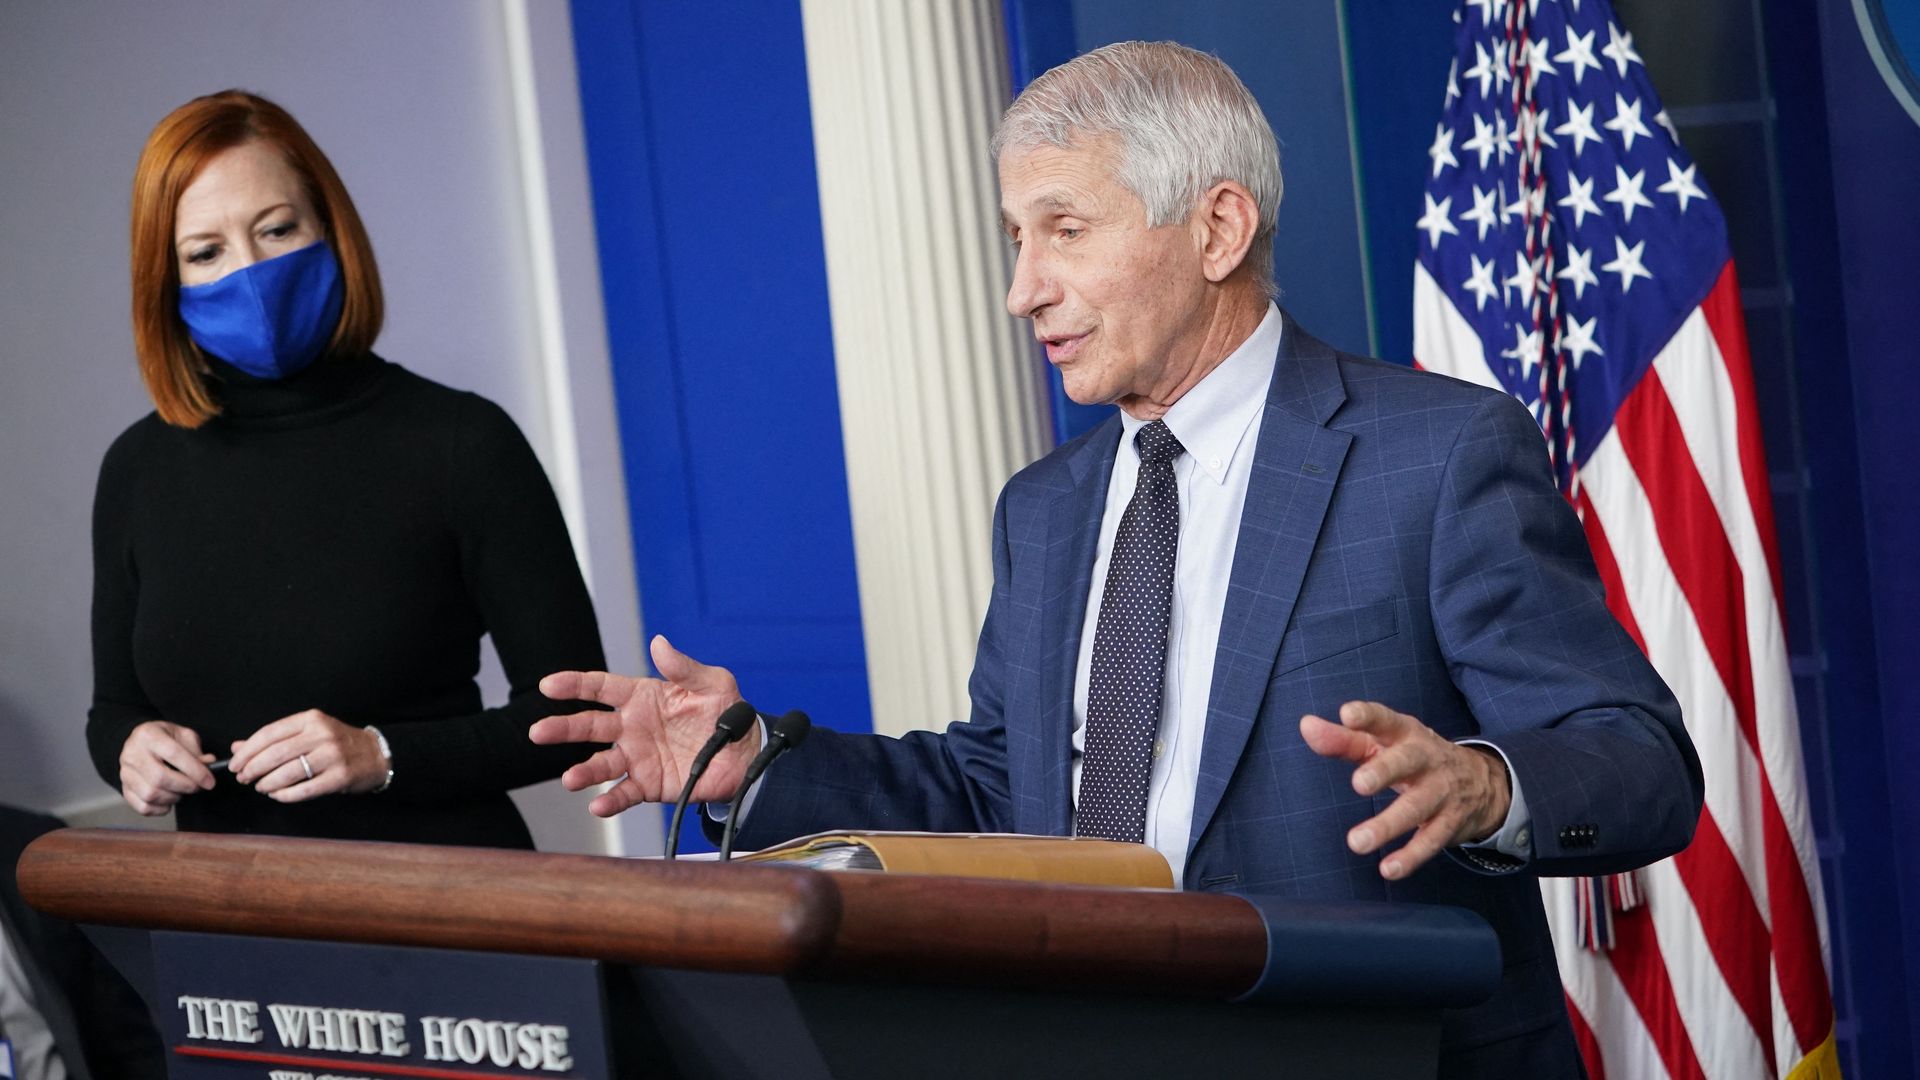 Dr. Anthony Fauci speaks during the daily briefing at the White House on Dec. 1. Photo: Mandel Ngan/AFP via Getty Images